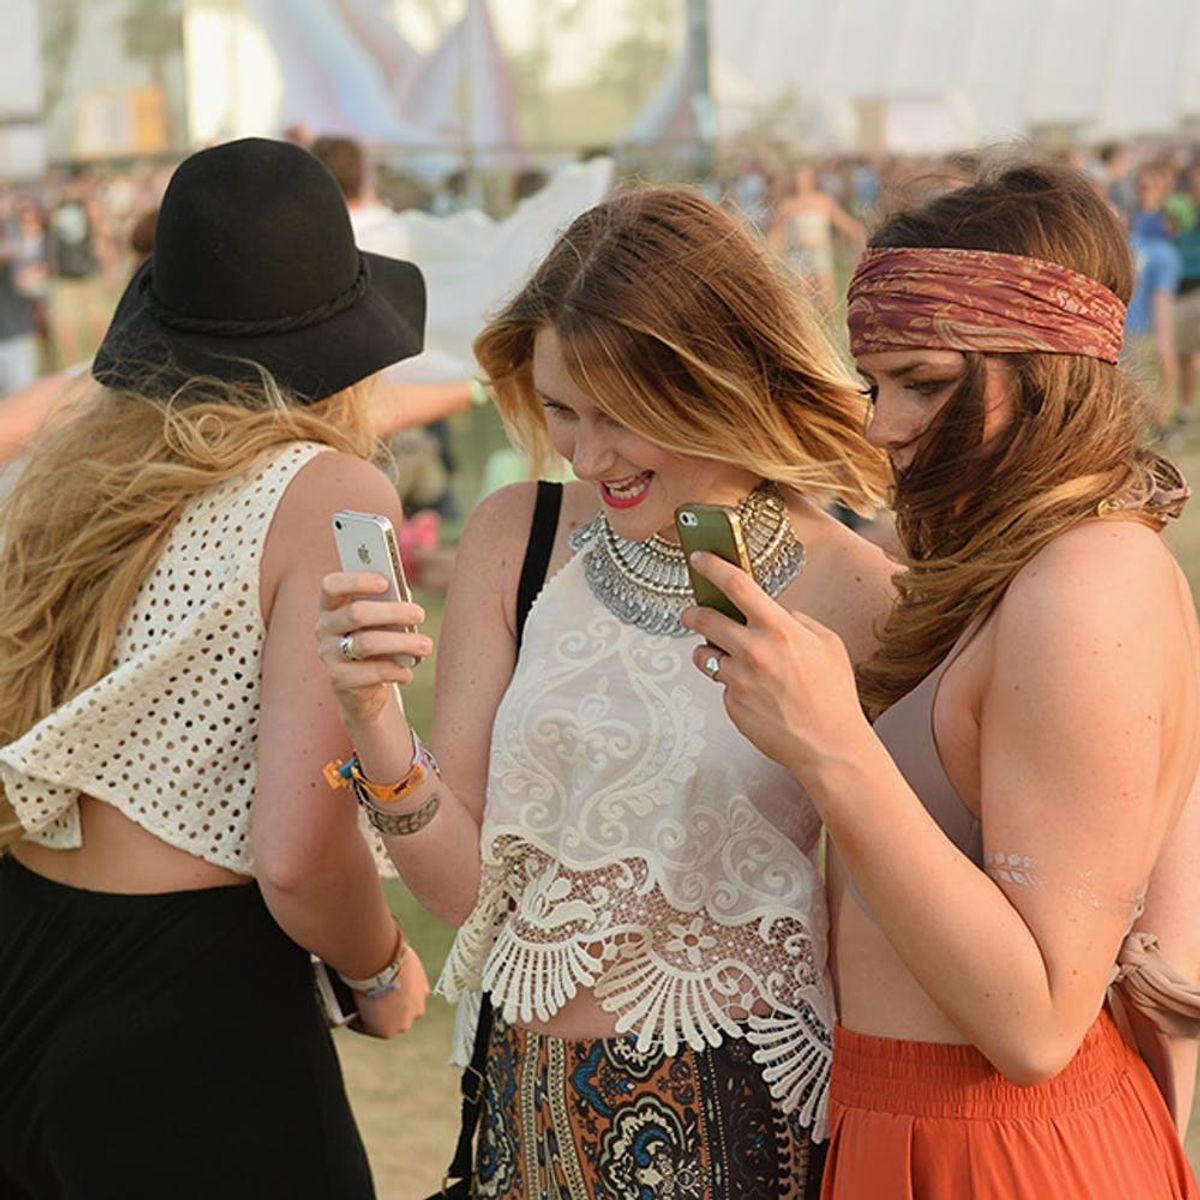 5 Selfie Accessories That Haven’t Been Banned from Music Fests